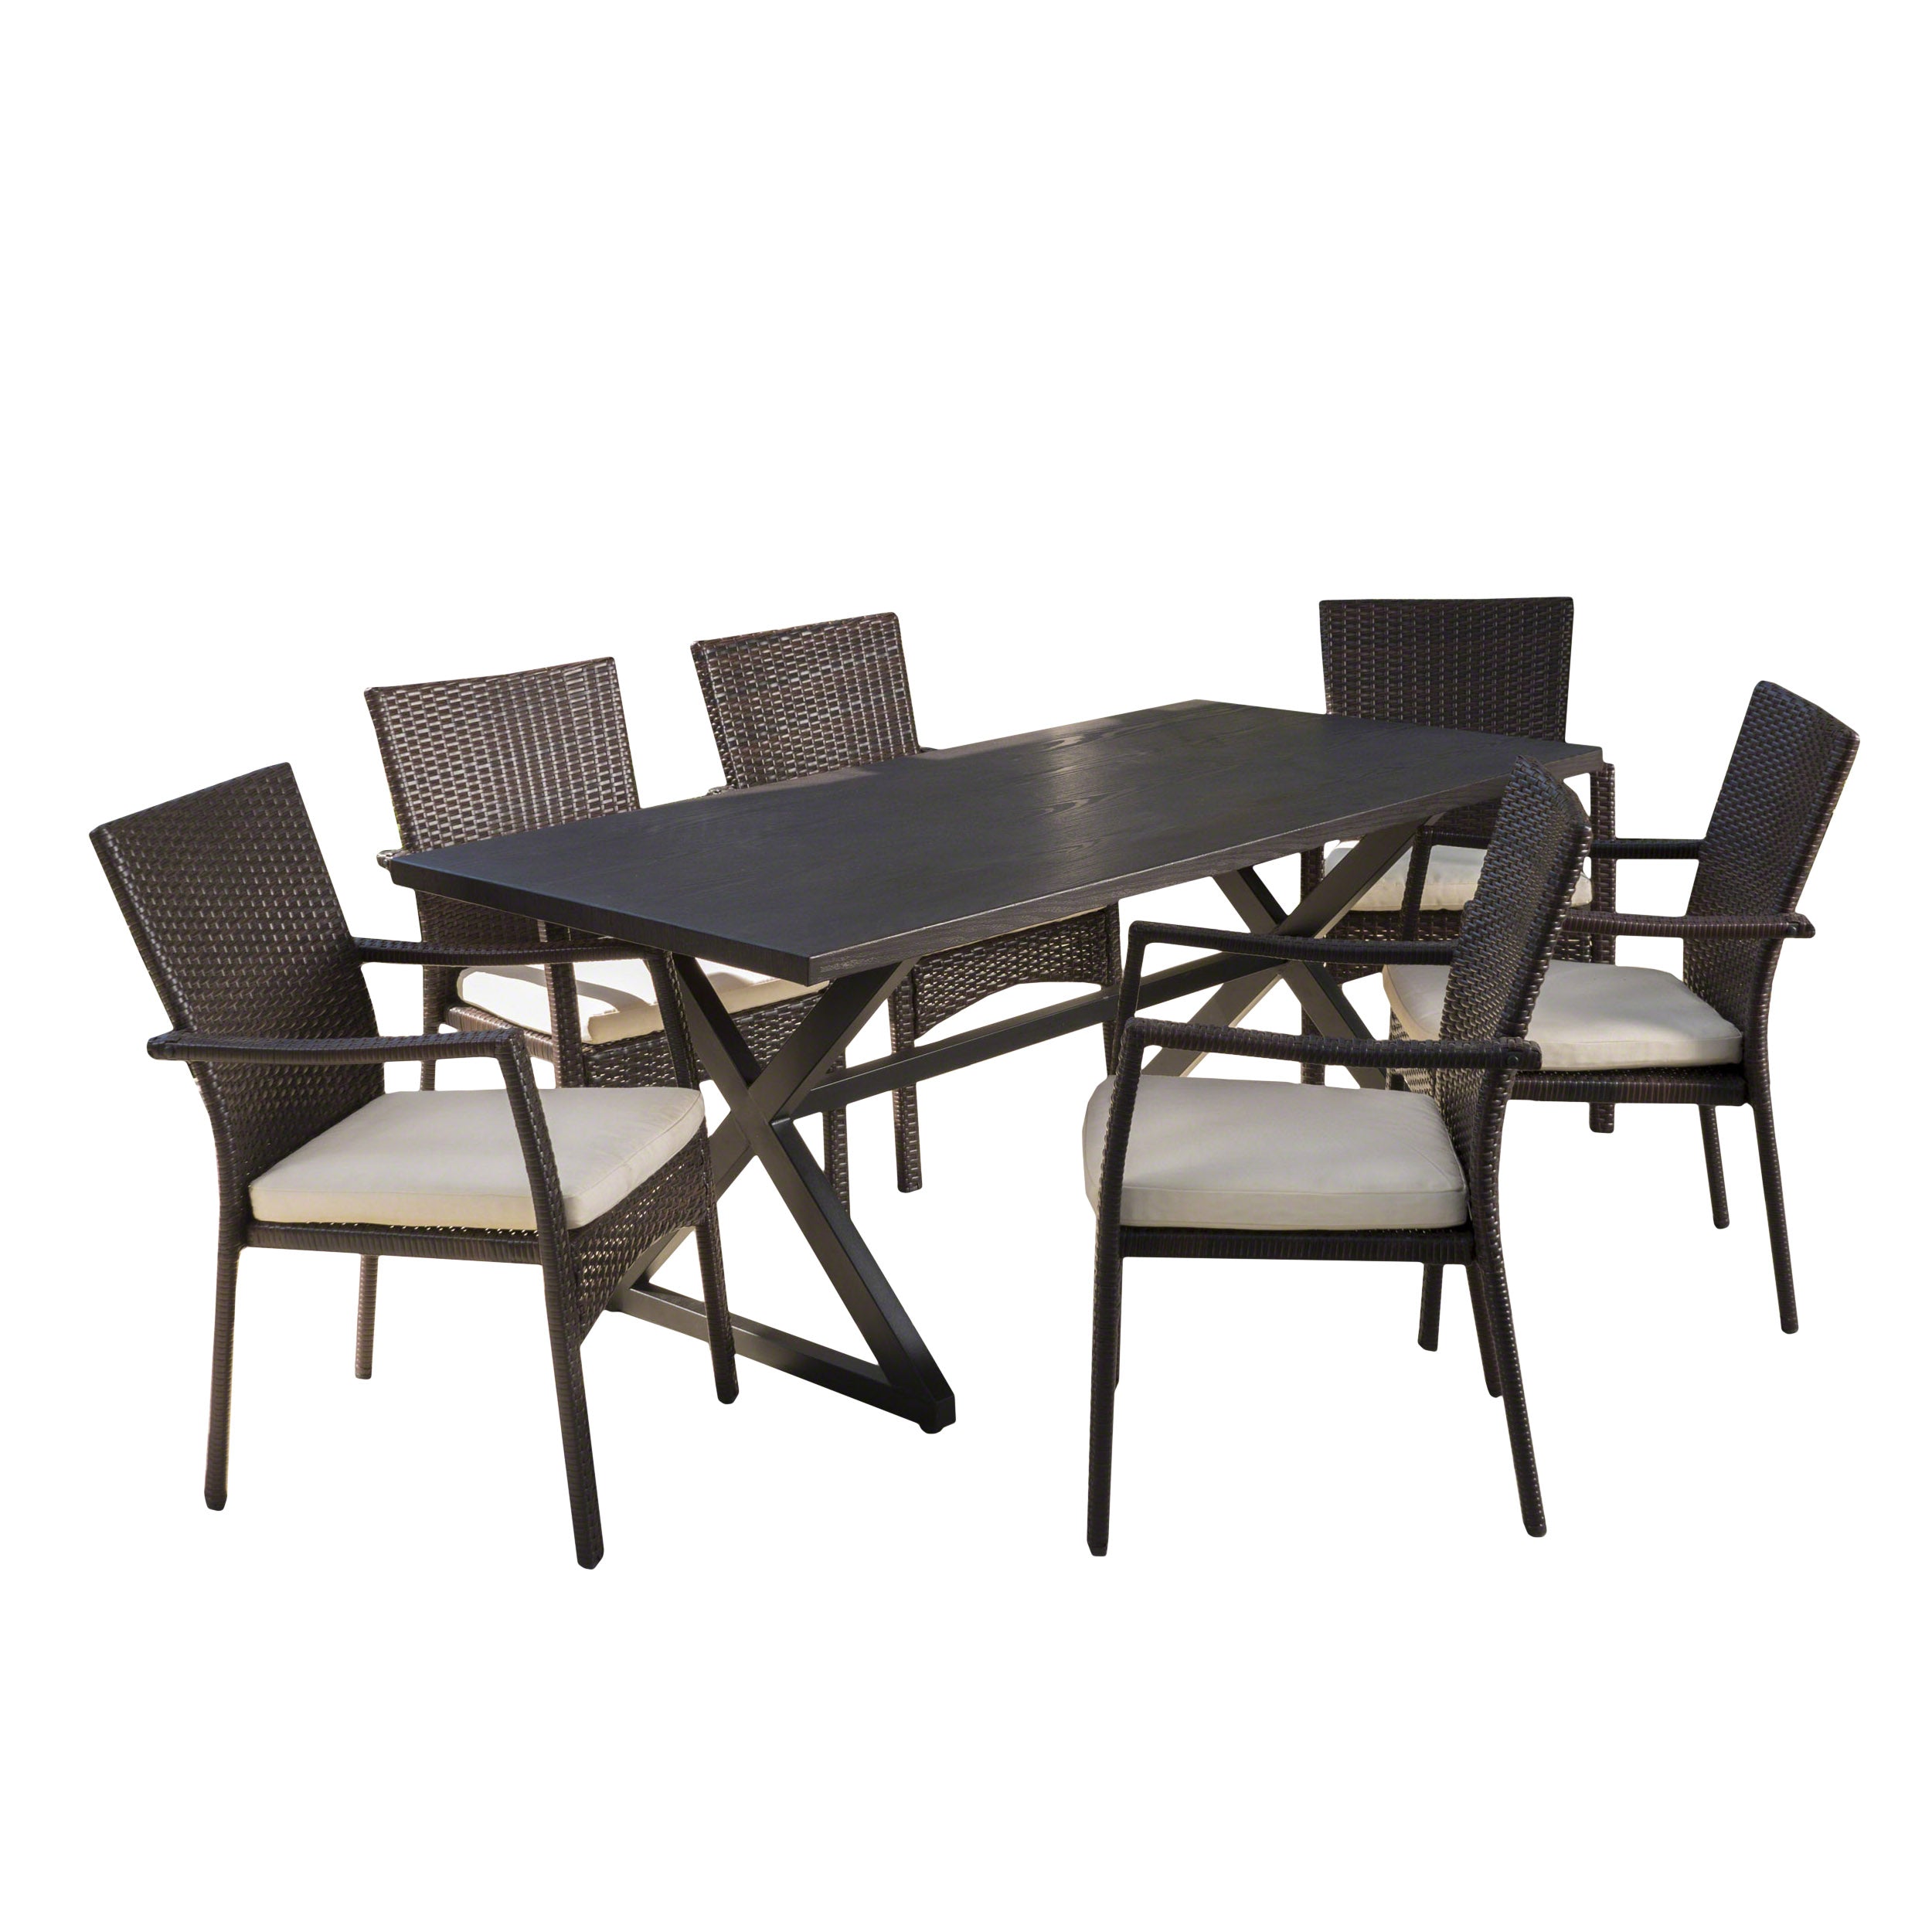 Adelade Outdoor 7 Piece Aluminum Dining Set with Wicker Dining Chairs BlackBrown